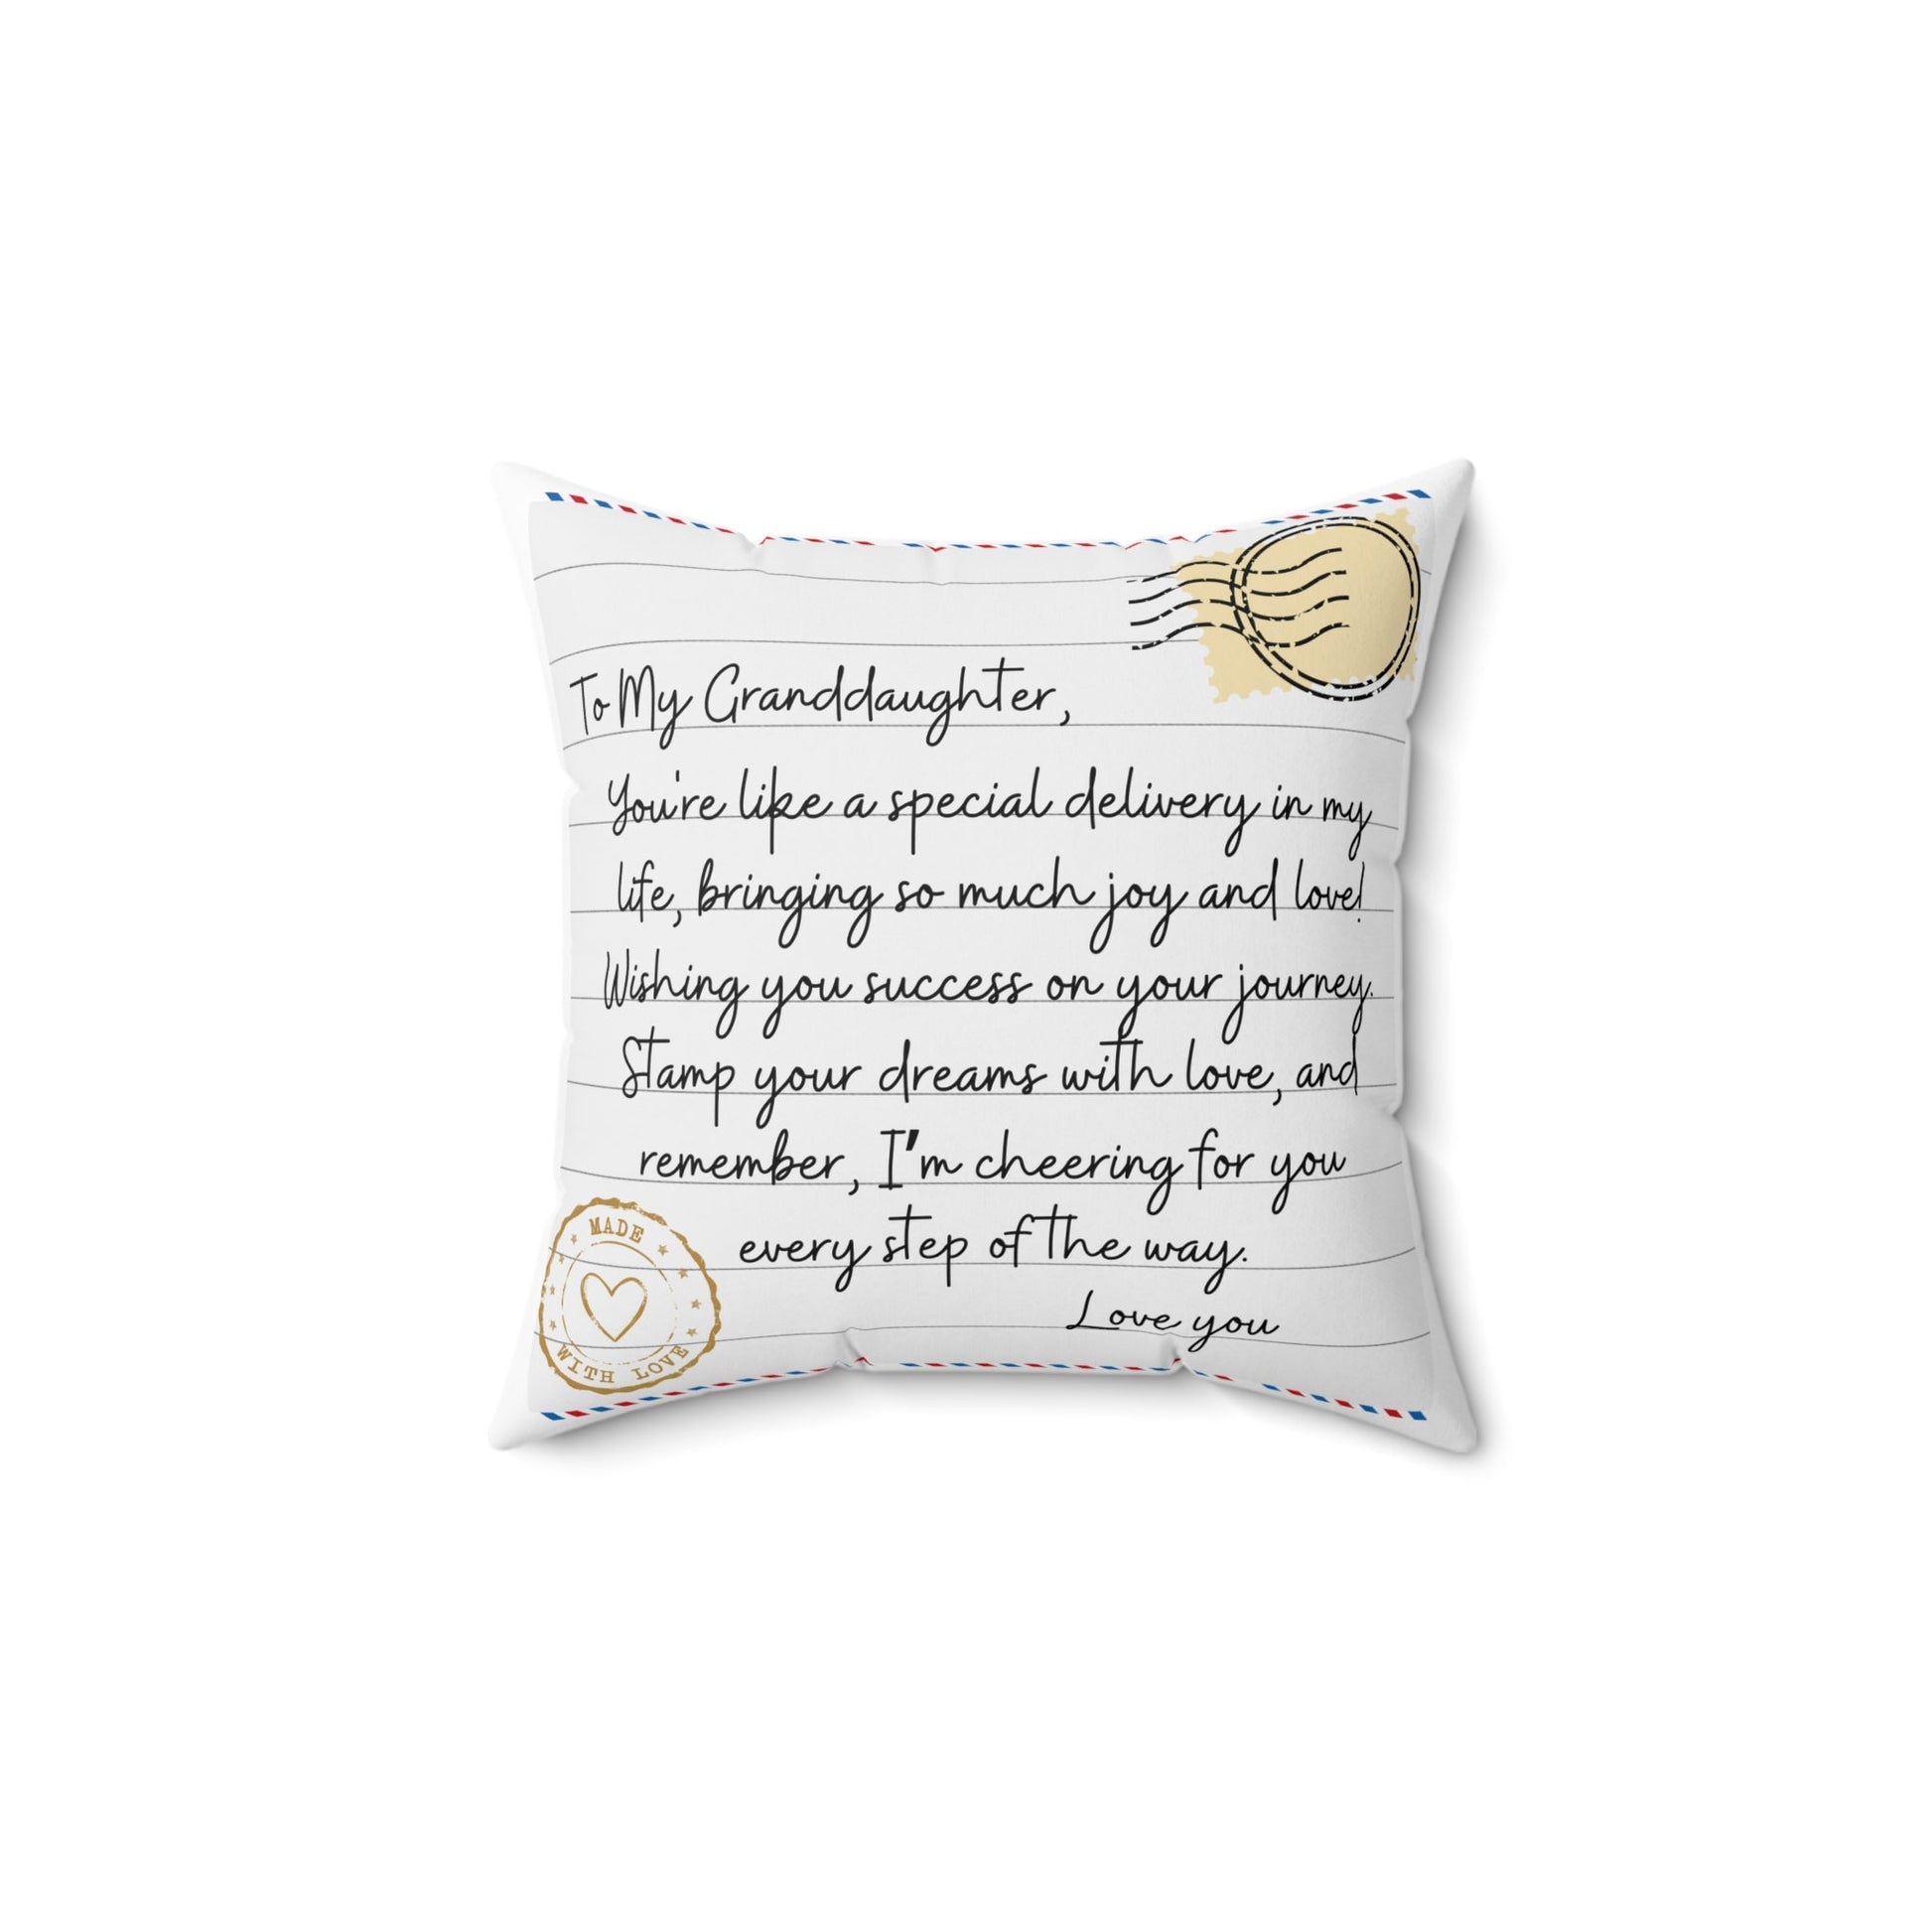 Stamped With Love Pillow for Granddaughter - 14’ × Home